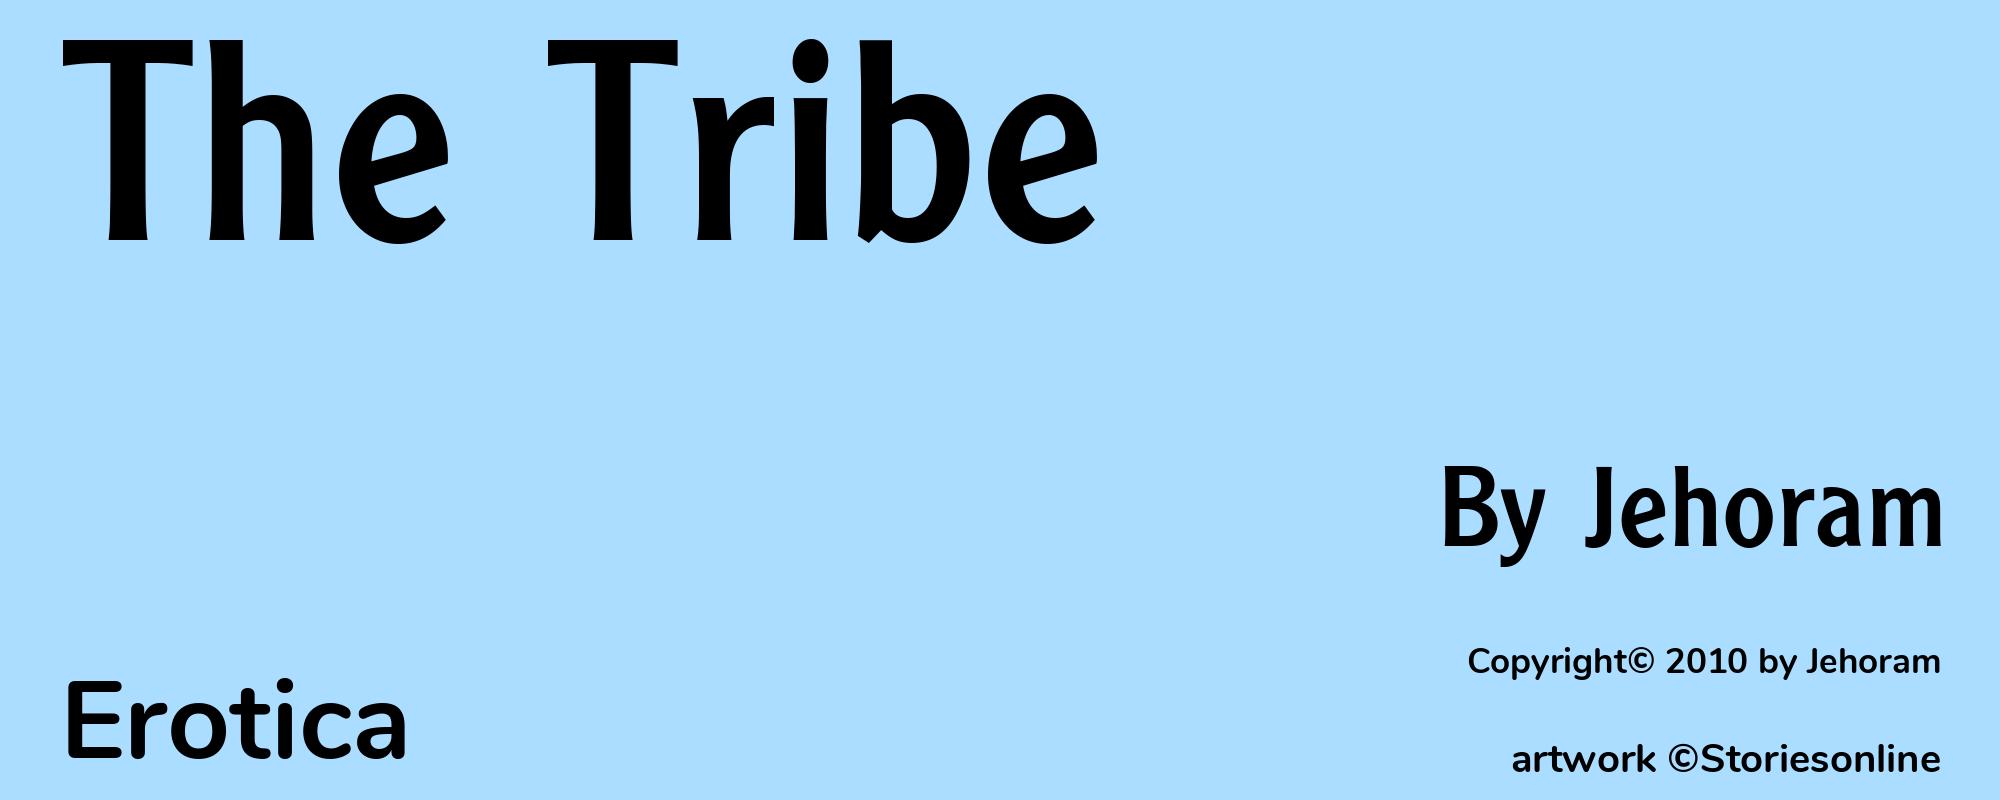 The Tribe - Cover